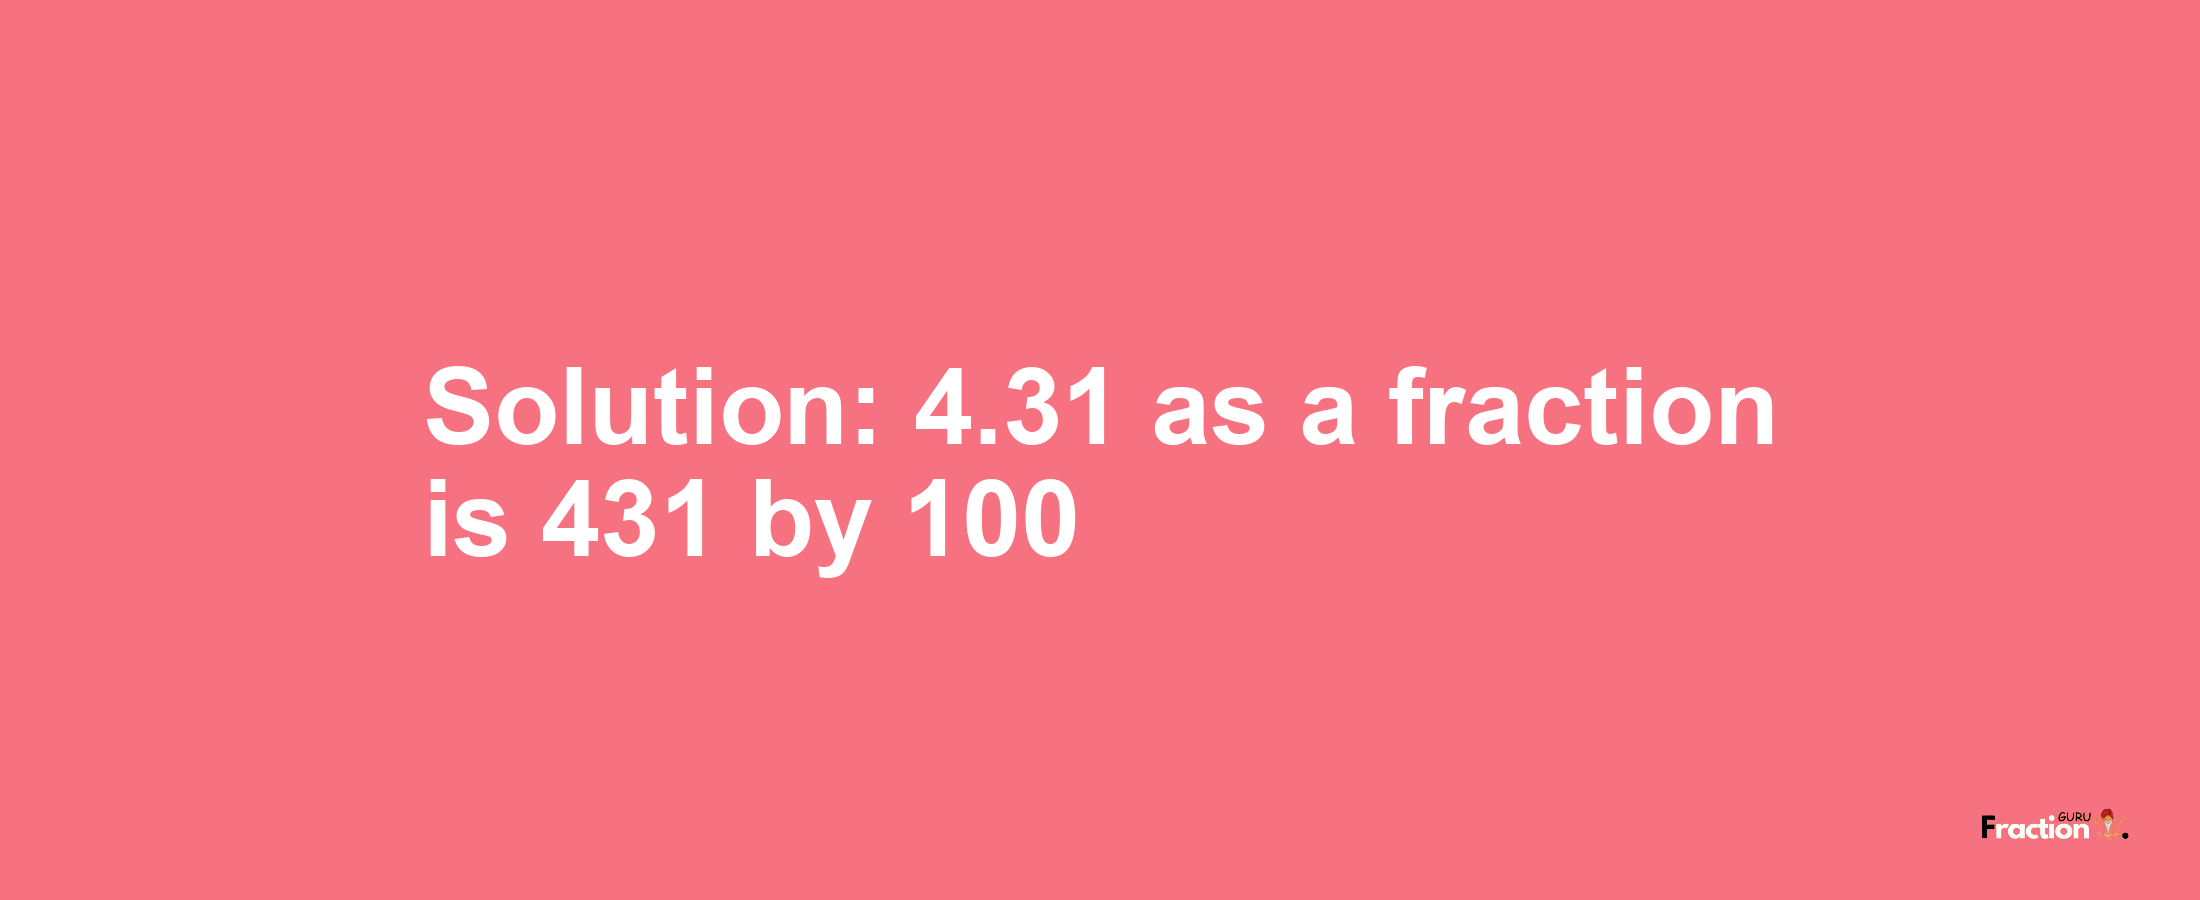 Solution:4.31 as a fraction is 431/100